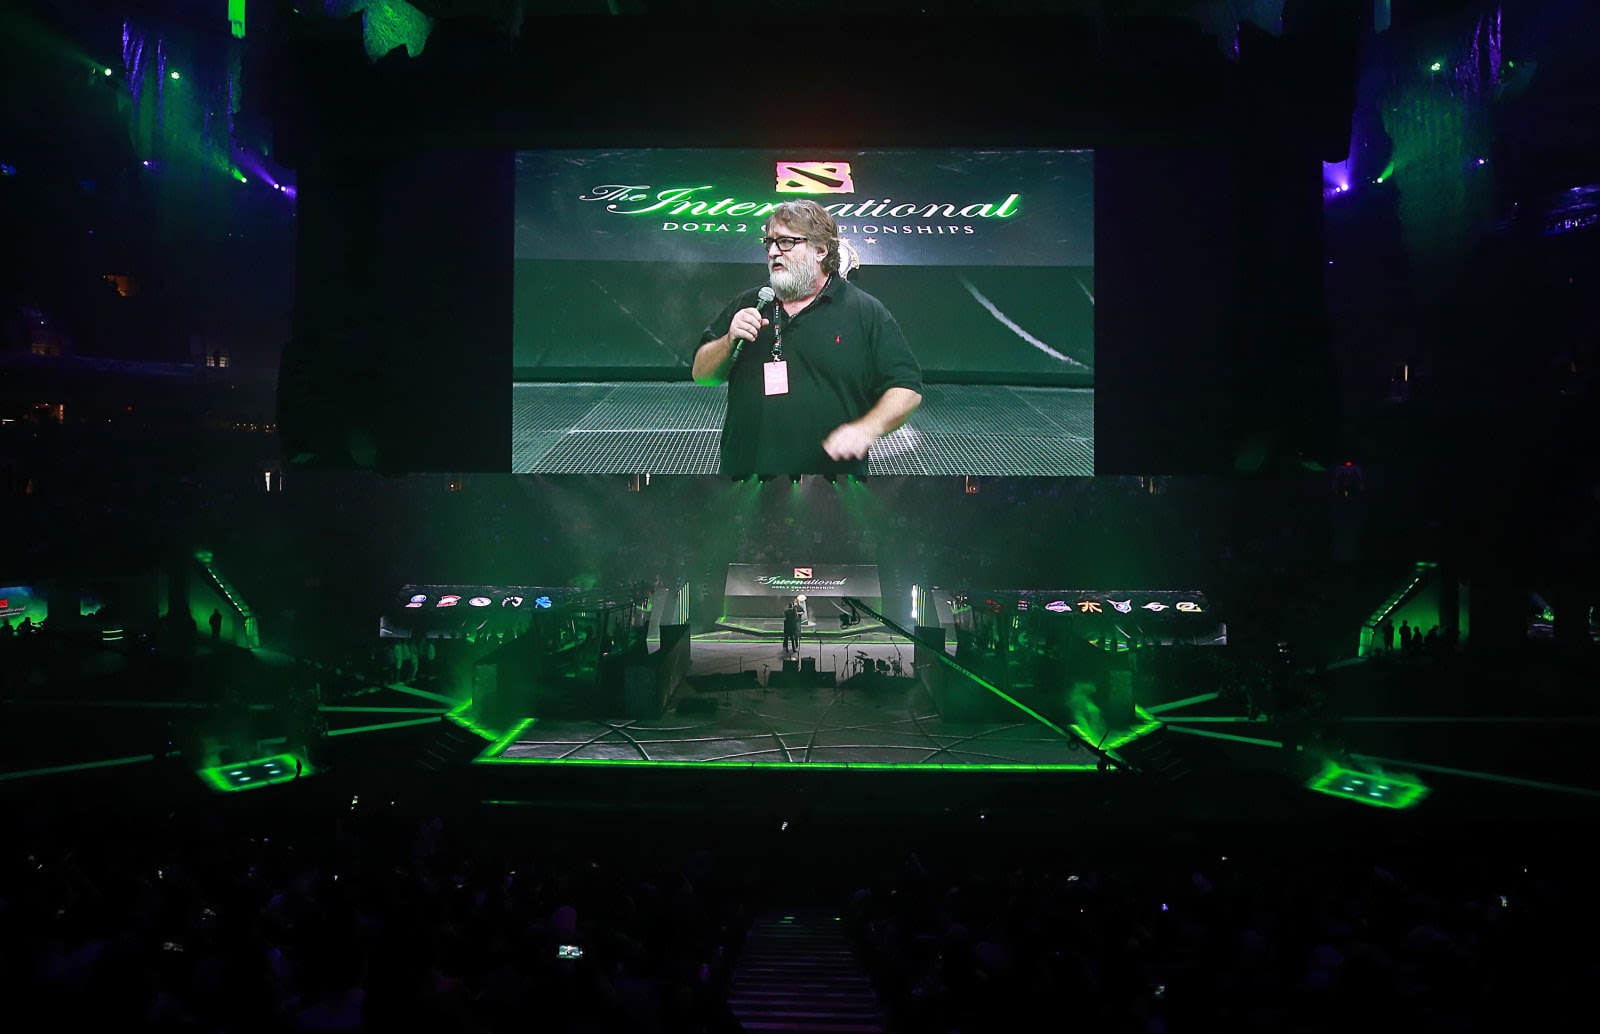 The Newest Dota 2 Shoutcaster Is Valve Boss Gabe Newell